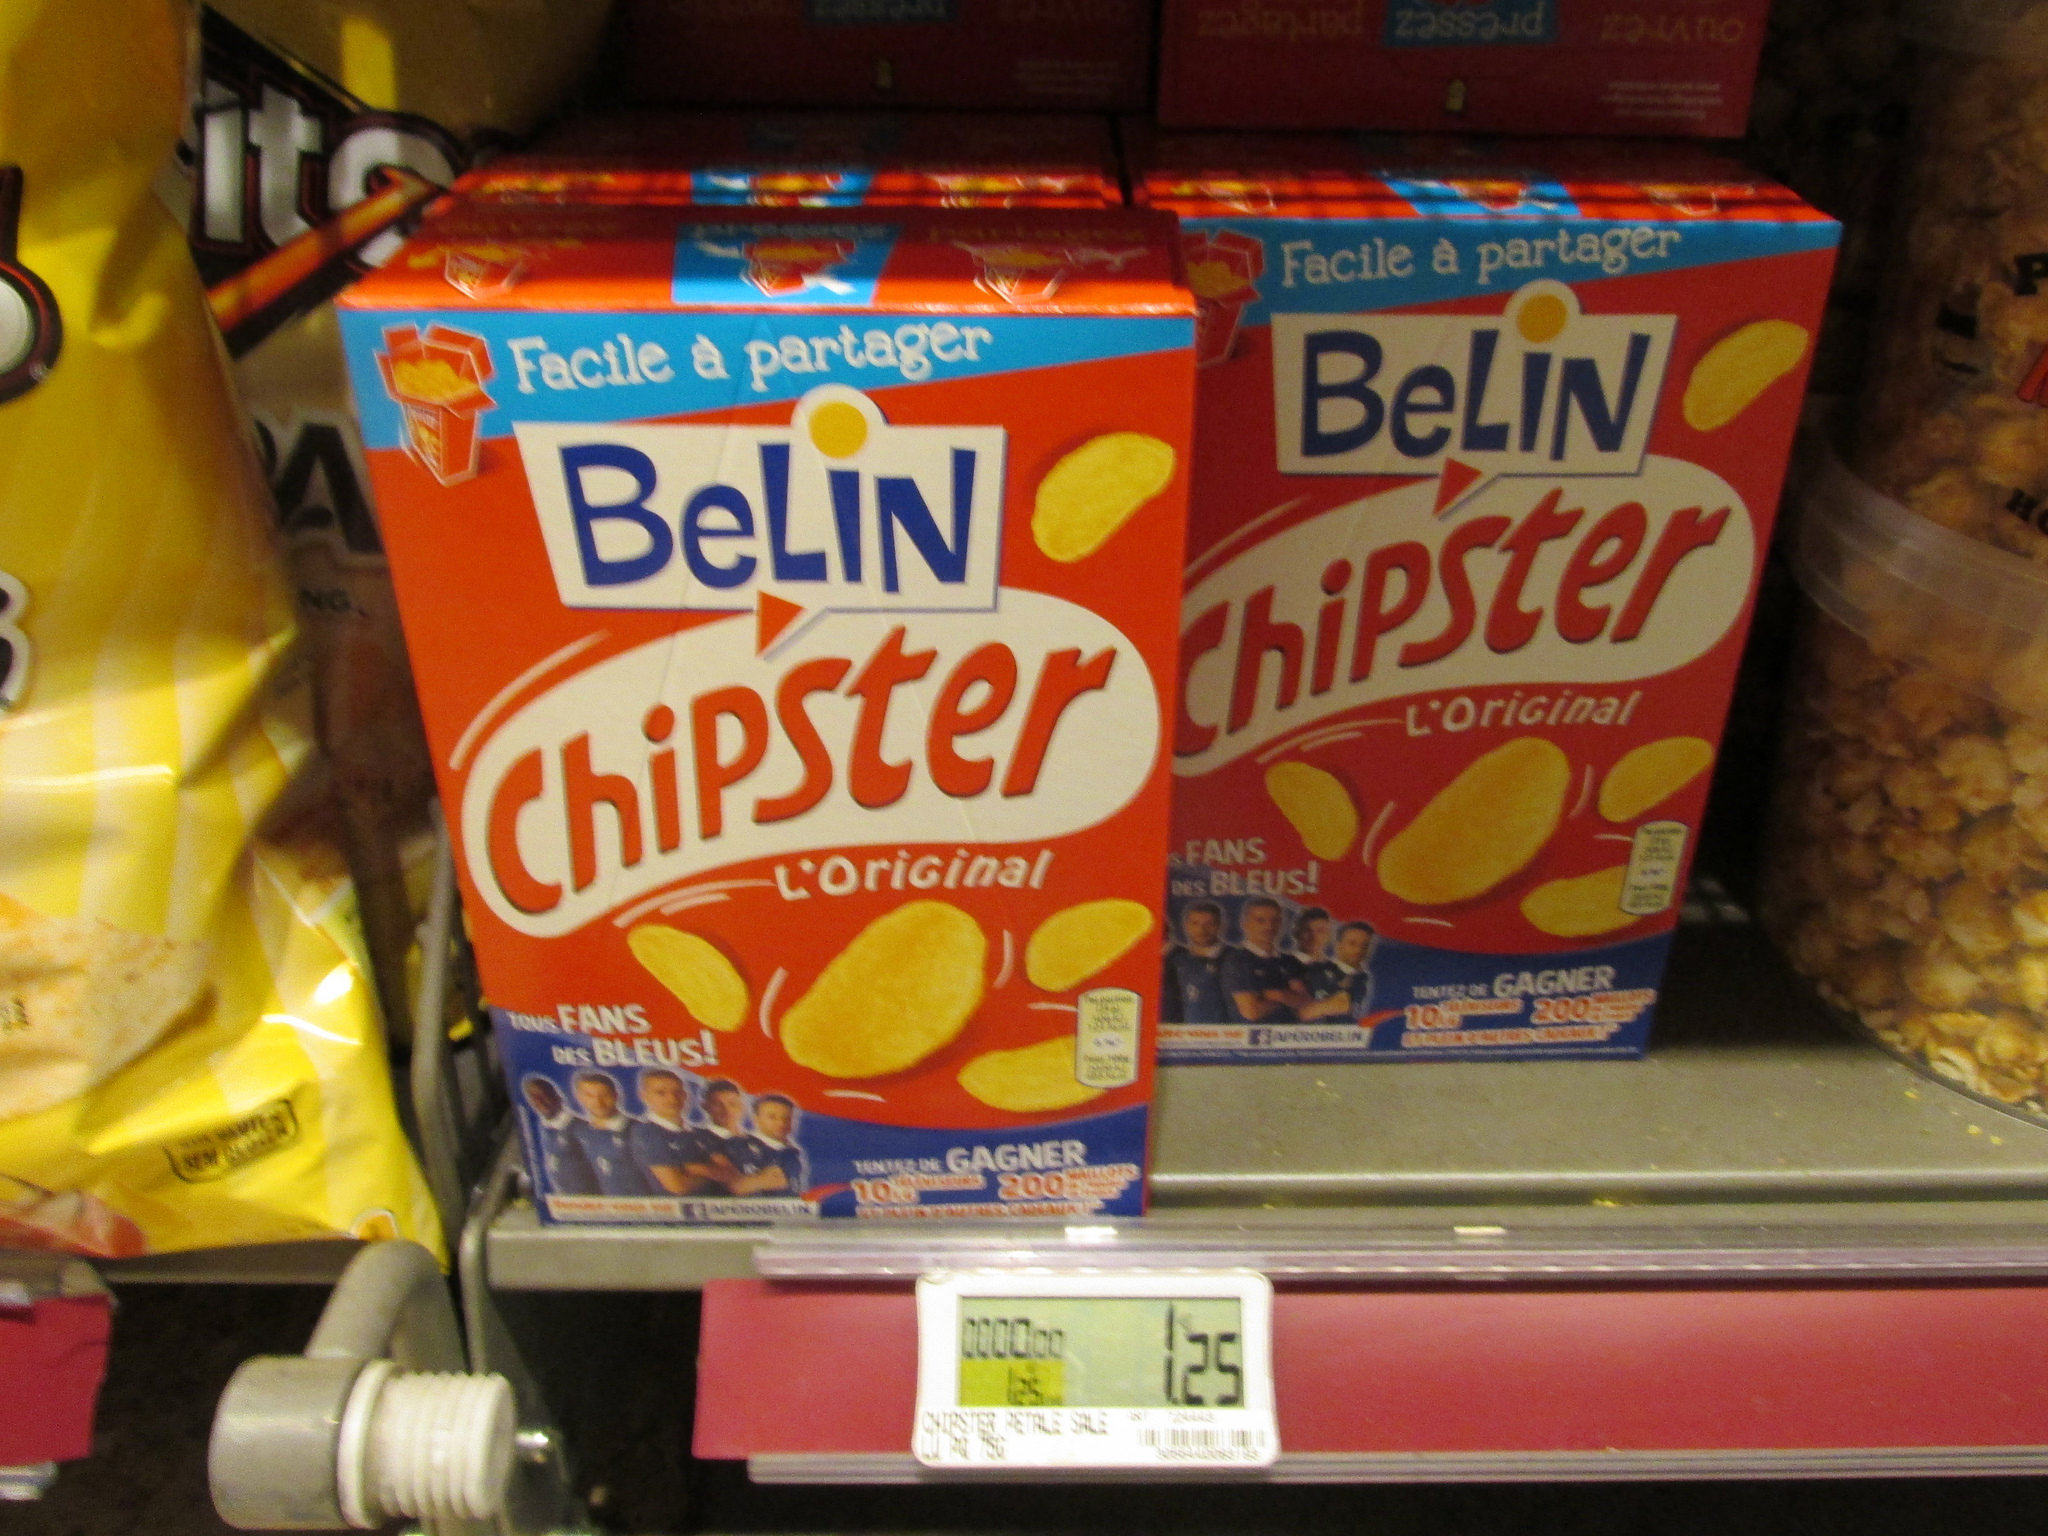 Belin, che chipster